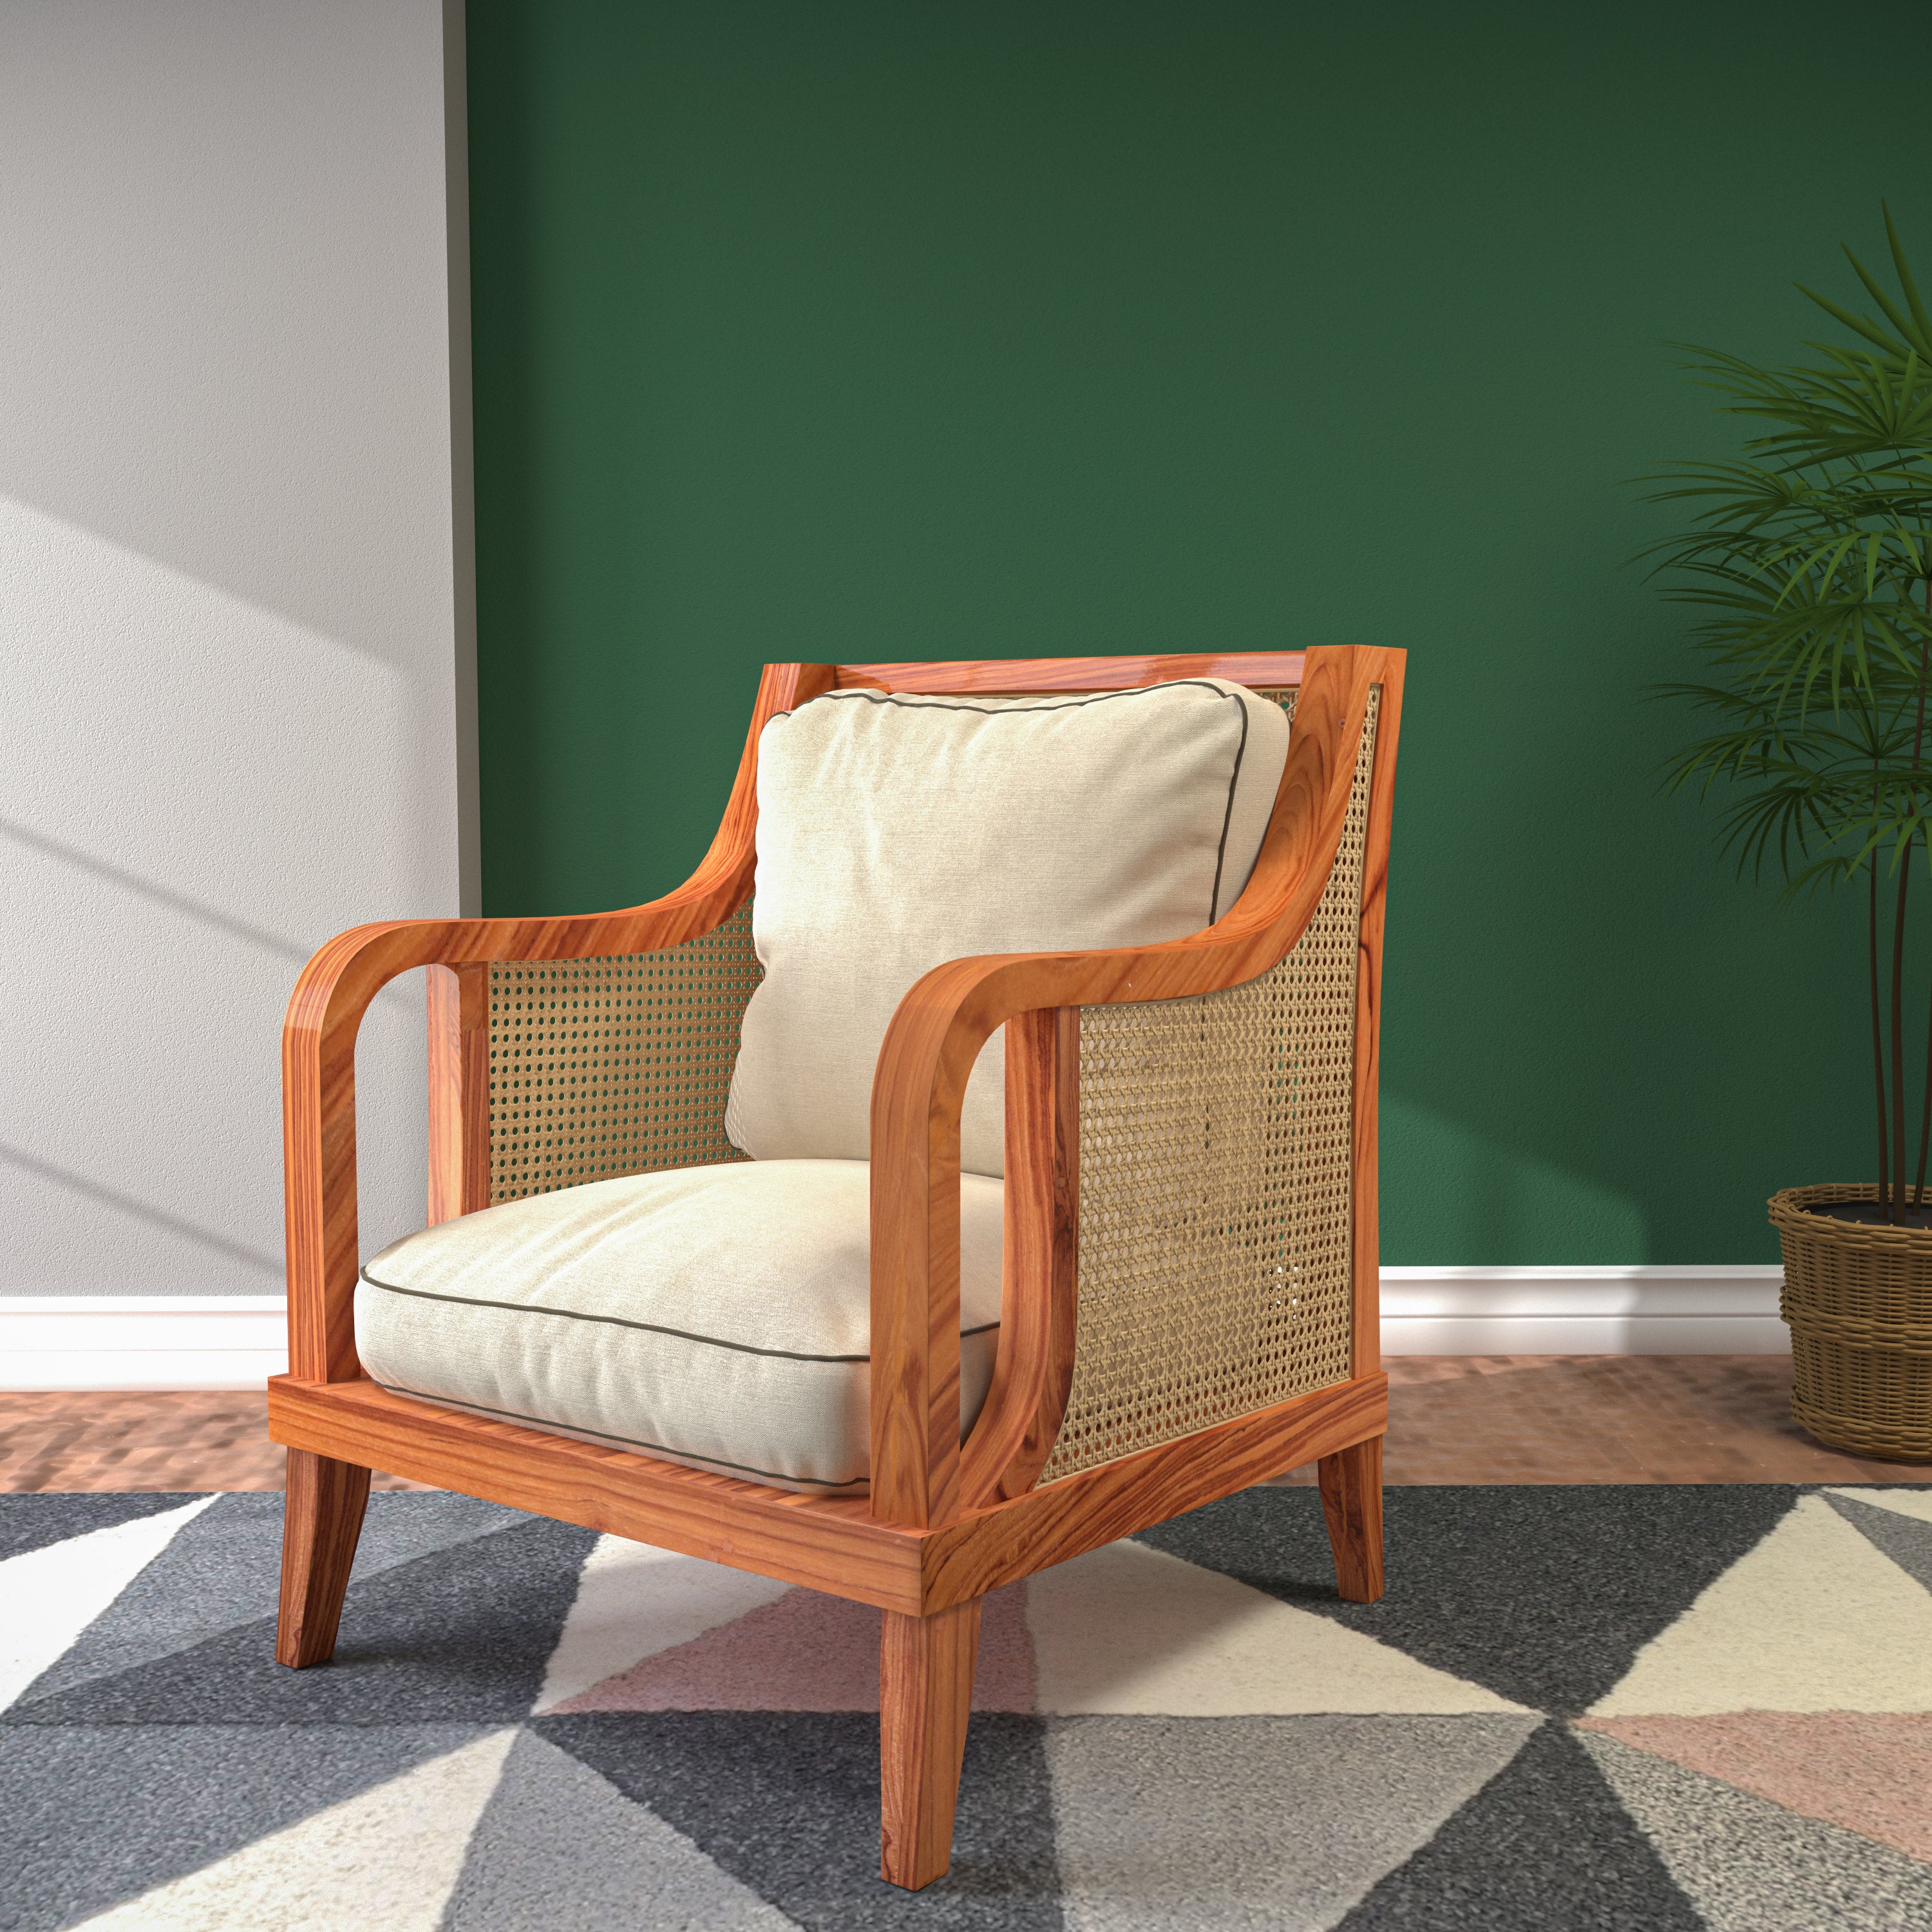 Solid Teak Comfy Upholstered Cane Chair Arm Chair